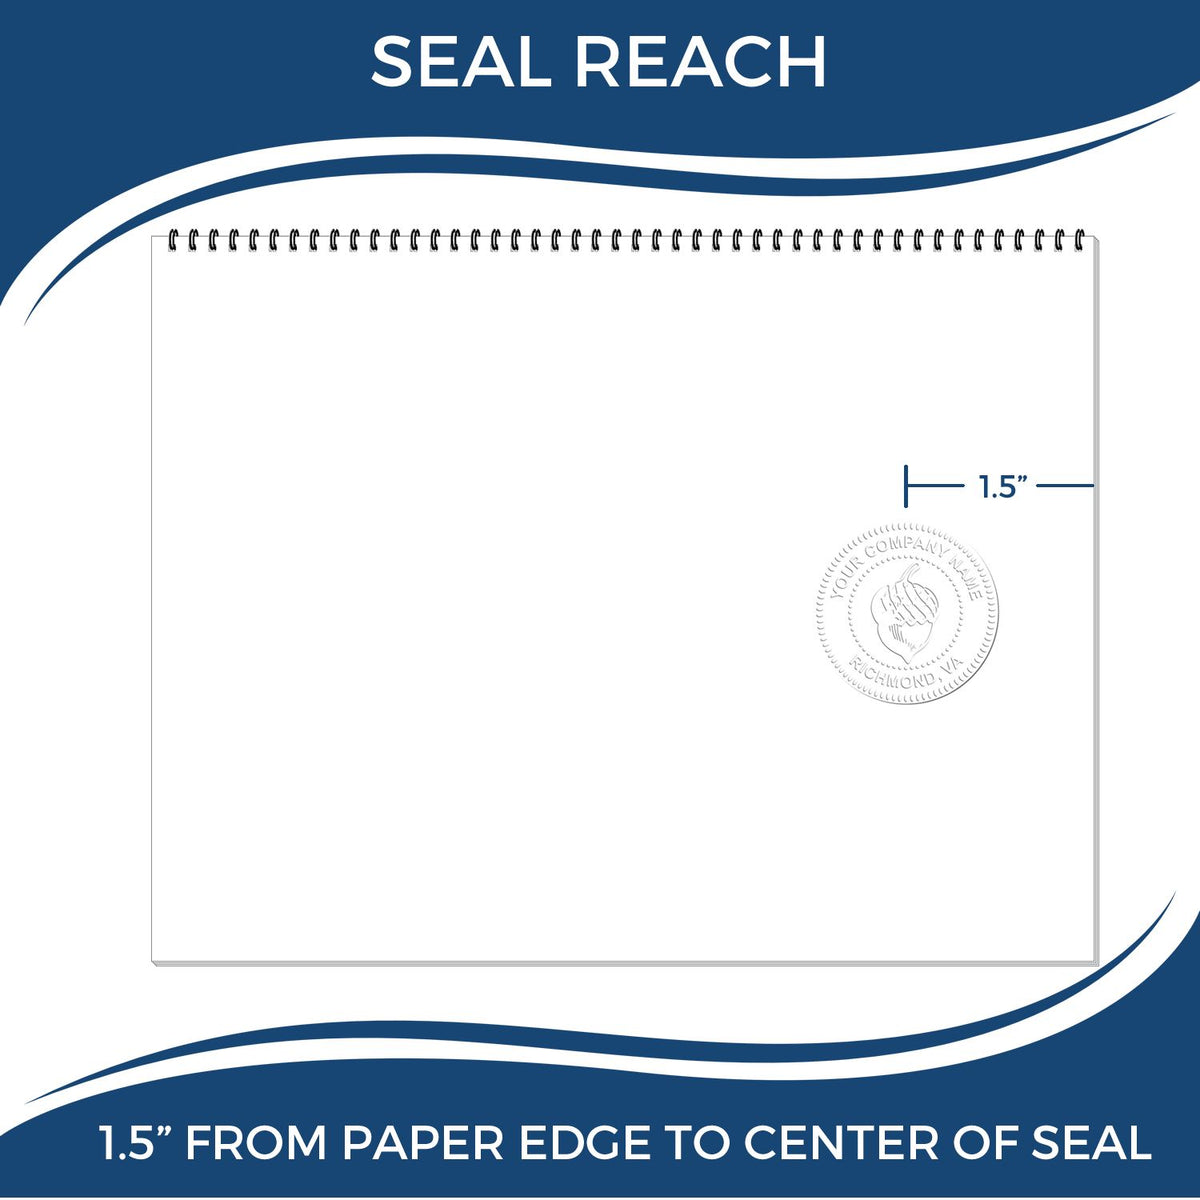 An infographic showing the seal reach which is represented by a ruler and a miniature seal image of the District of Columbia Desk Architect Embossing Seal